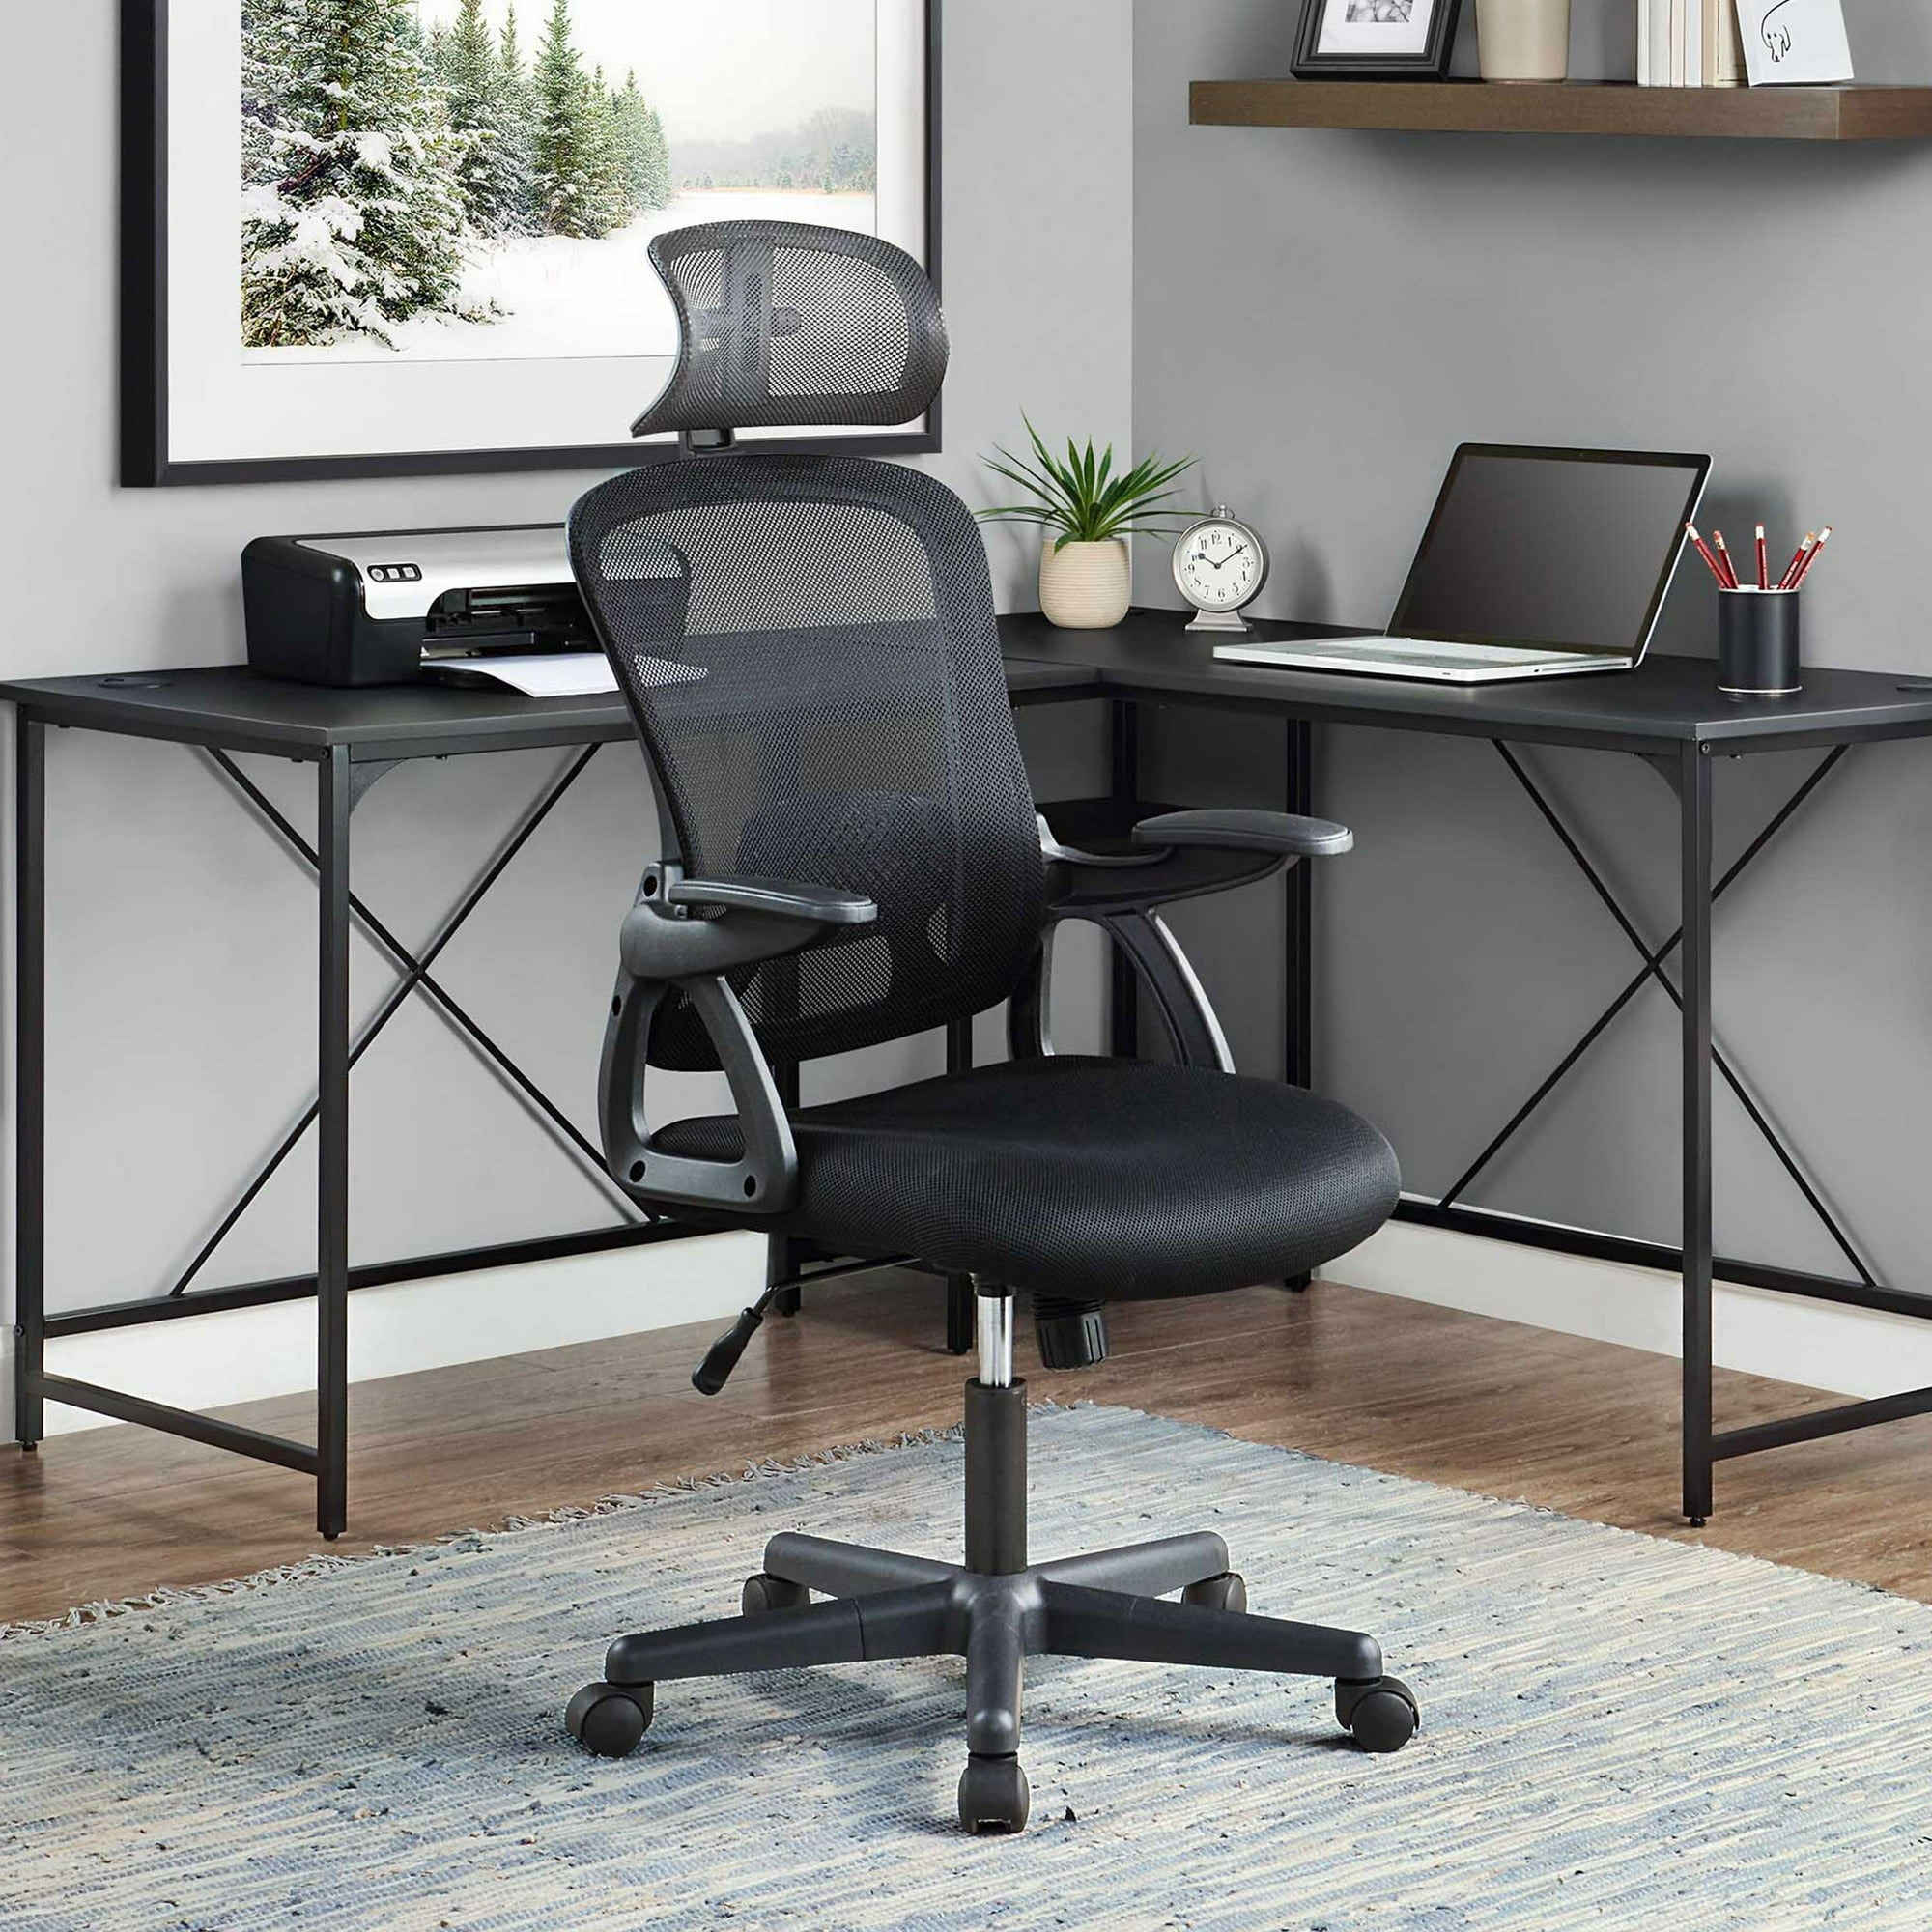 the black swivel chair in front of a desk